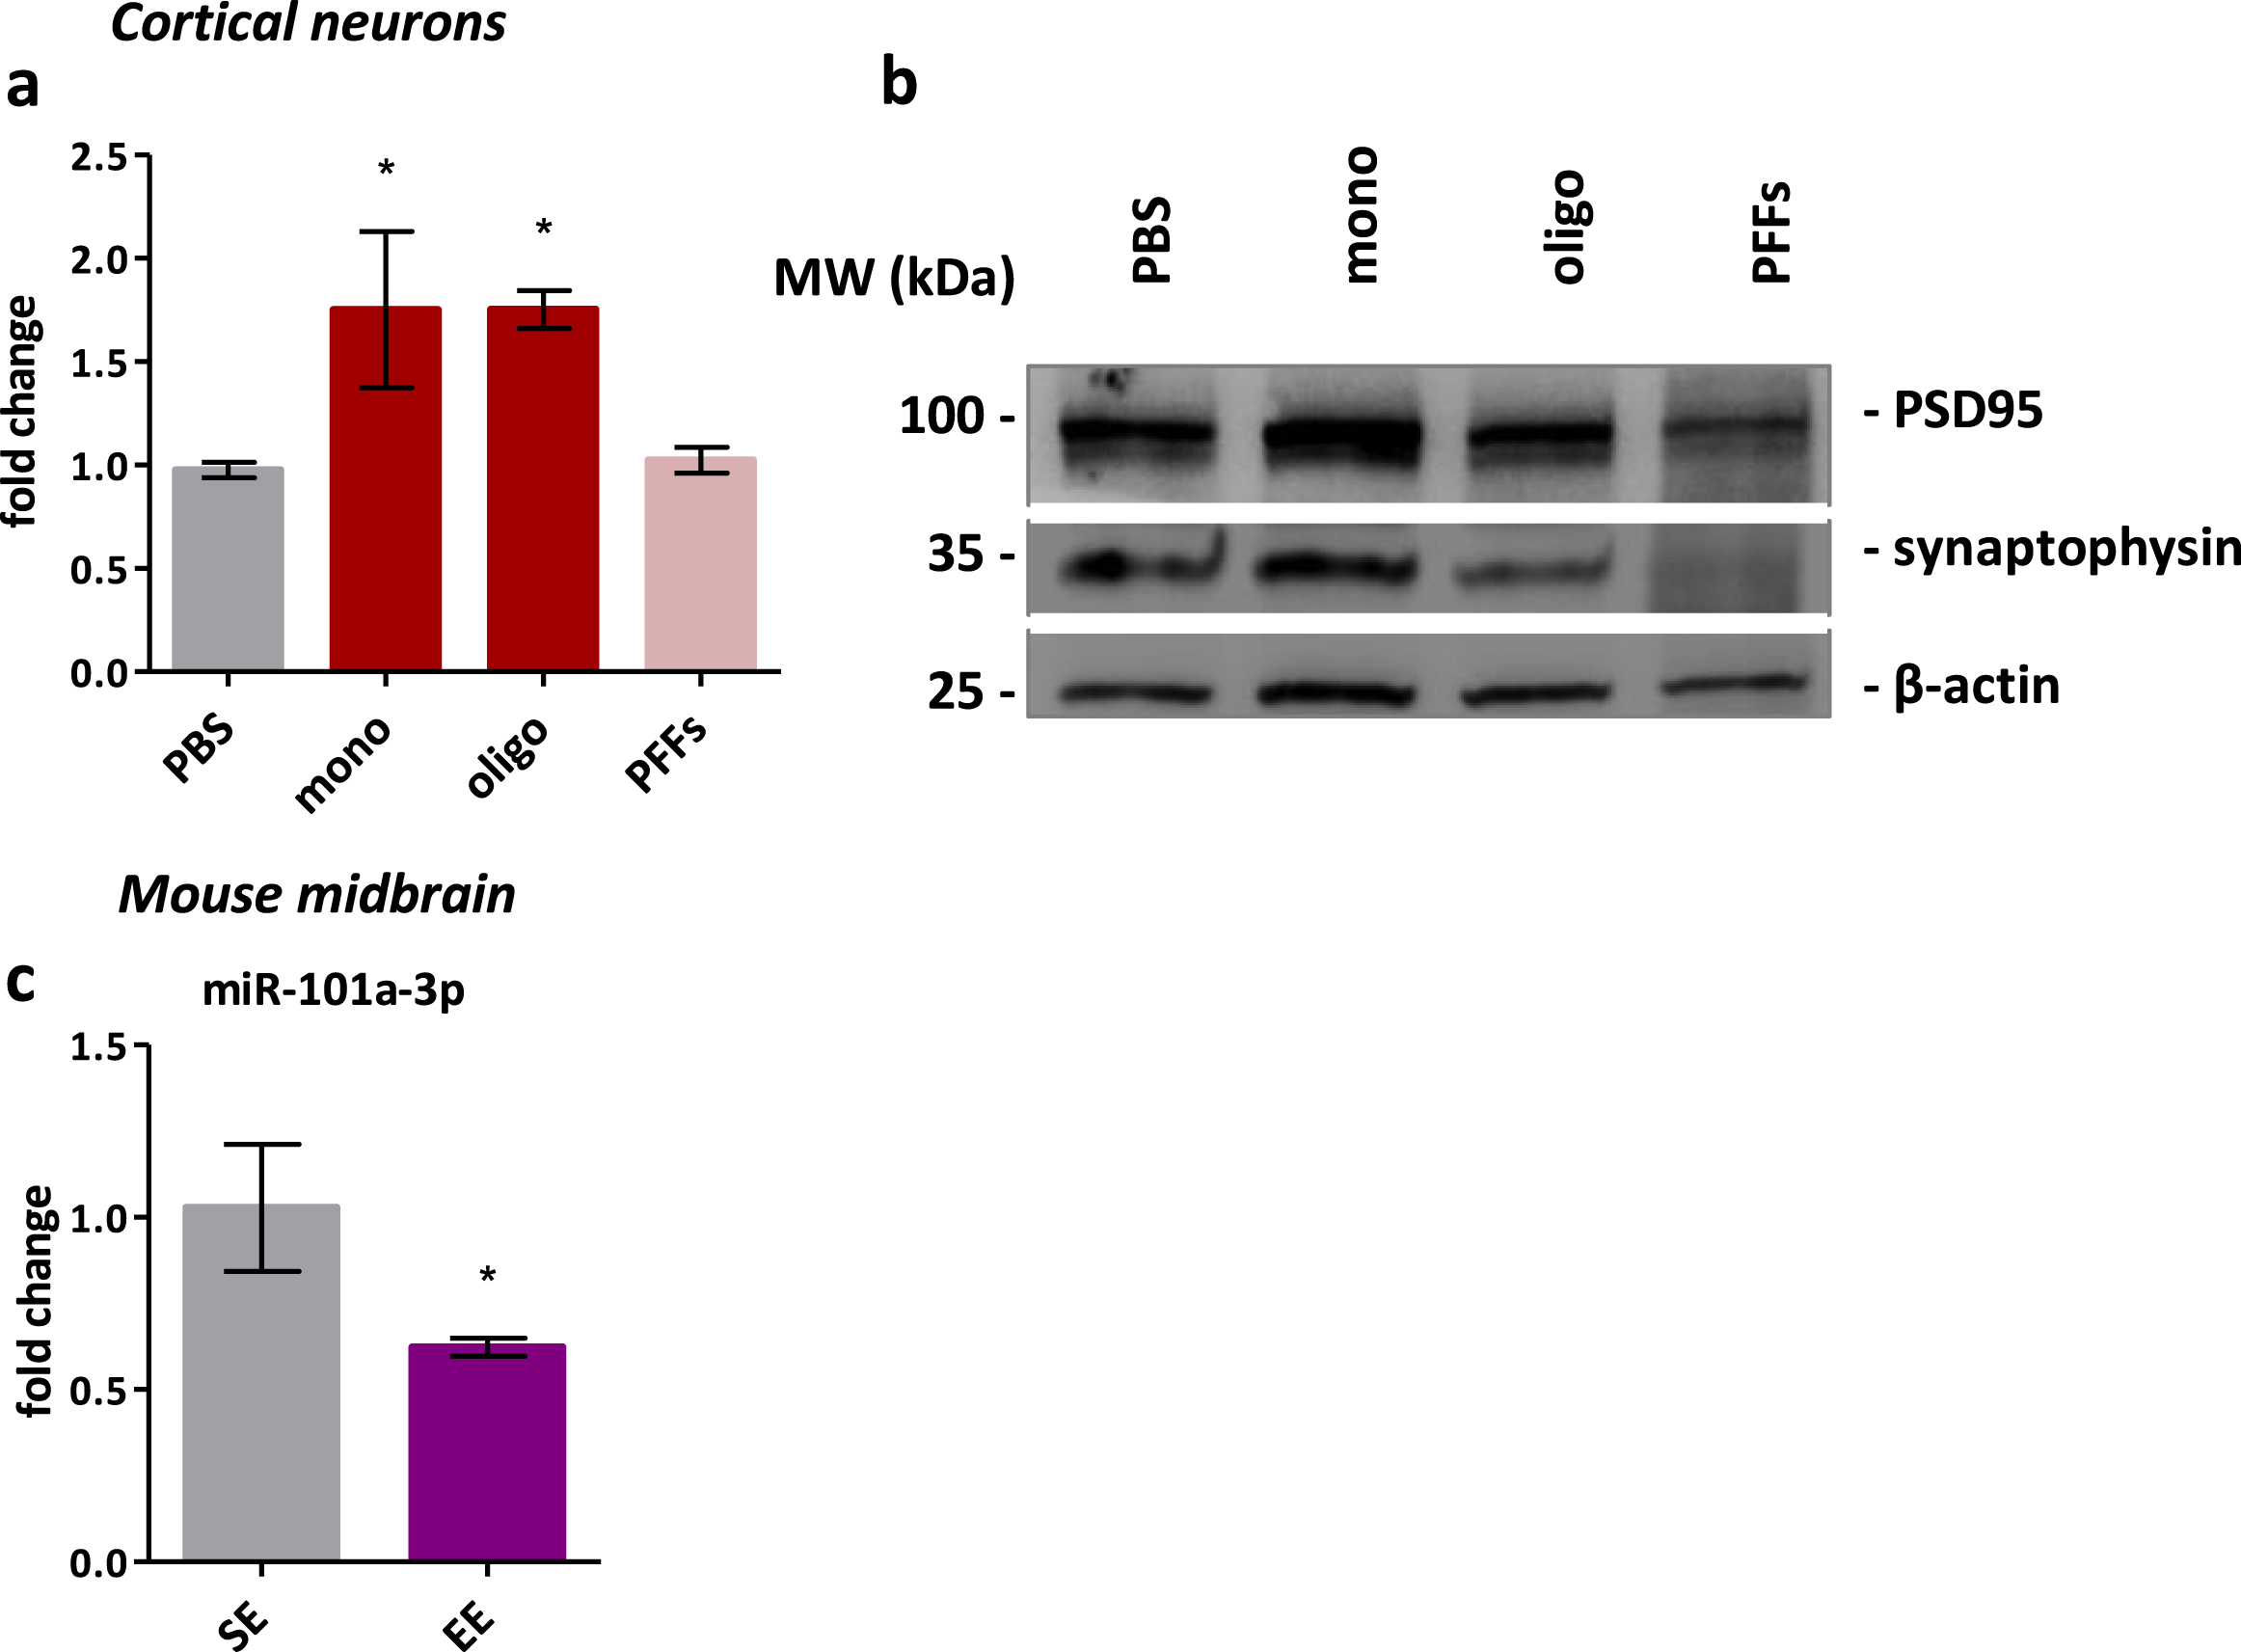 miR-101a-3p is reduced in a model of synaptic plasticity and induced by aSyn. a) Real-time qPCR assessment of miR-101a-3p levels in neurons exposed to monomeric or oligomeric aSyn species and PFFs. b) Representative Immunoblot of synaptic markers in neurons exposed to the different aSyn species. β-actin is used for normalization. c) Real-time qPCR assessment of miR-101a-3p levels in midbrain of mice grown in standard environment (n = 4) or enriched environment (n = 4). All data are expressed as mean±SEM; Student’s t-test; *p < 0.05, **p < 0.01, ***p < 0.001).